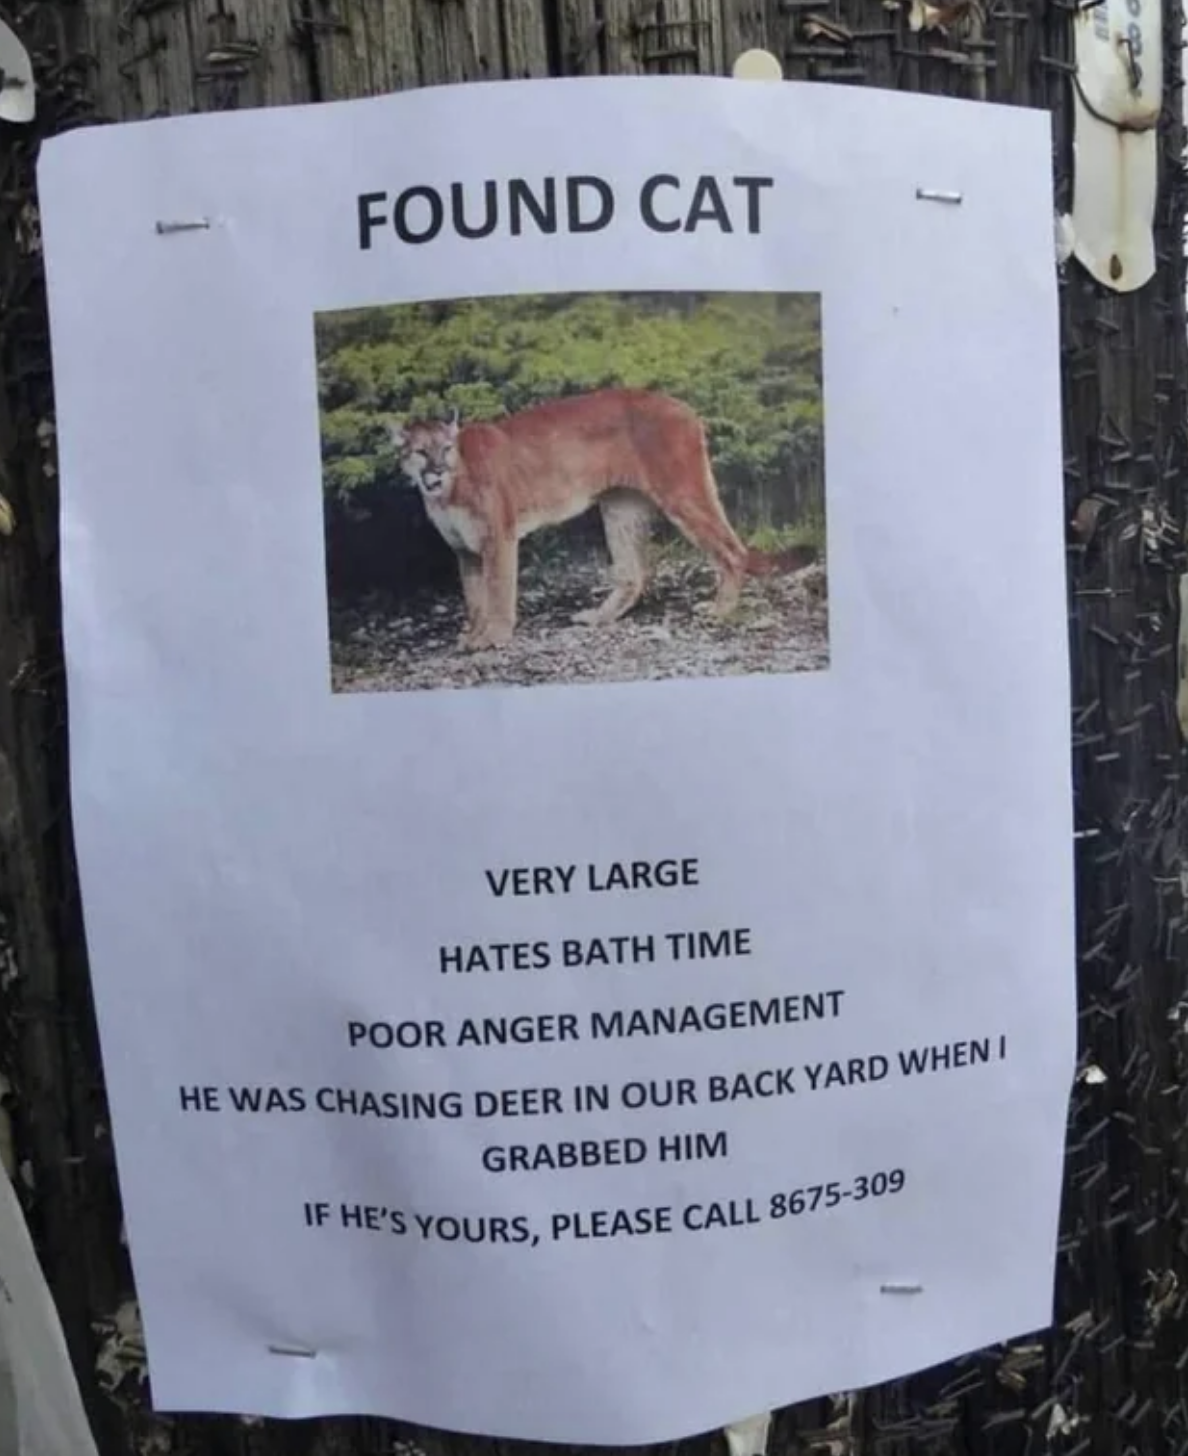 found cat poster has a photo of mountain lion